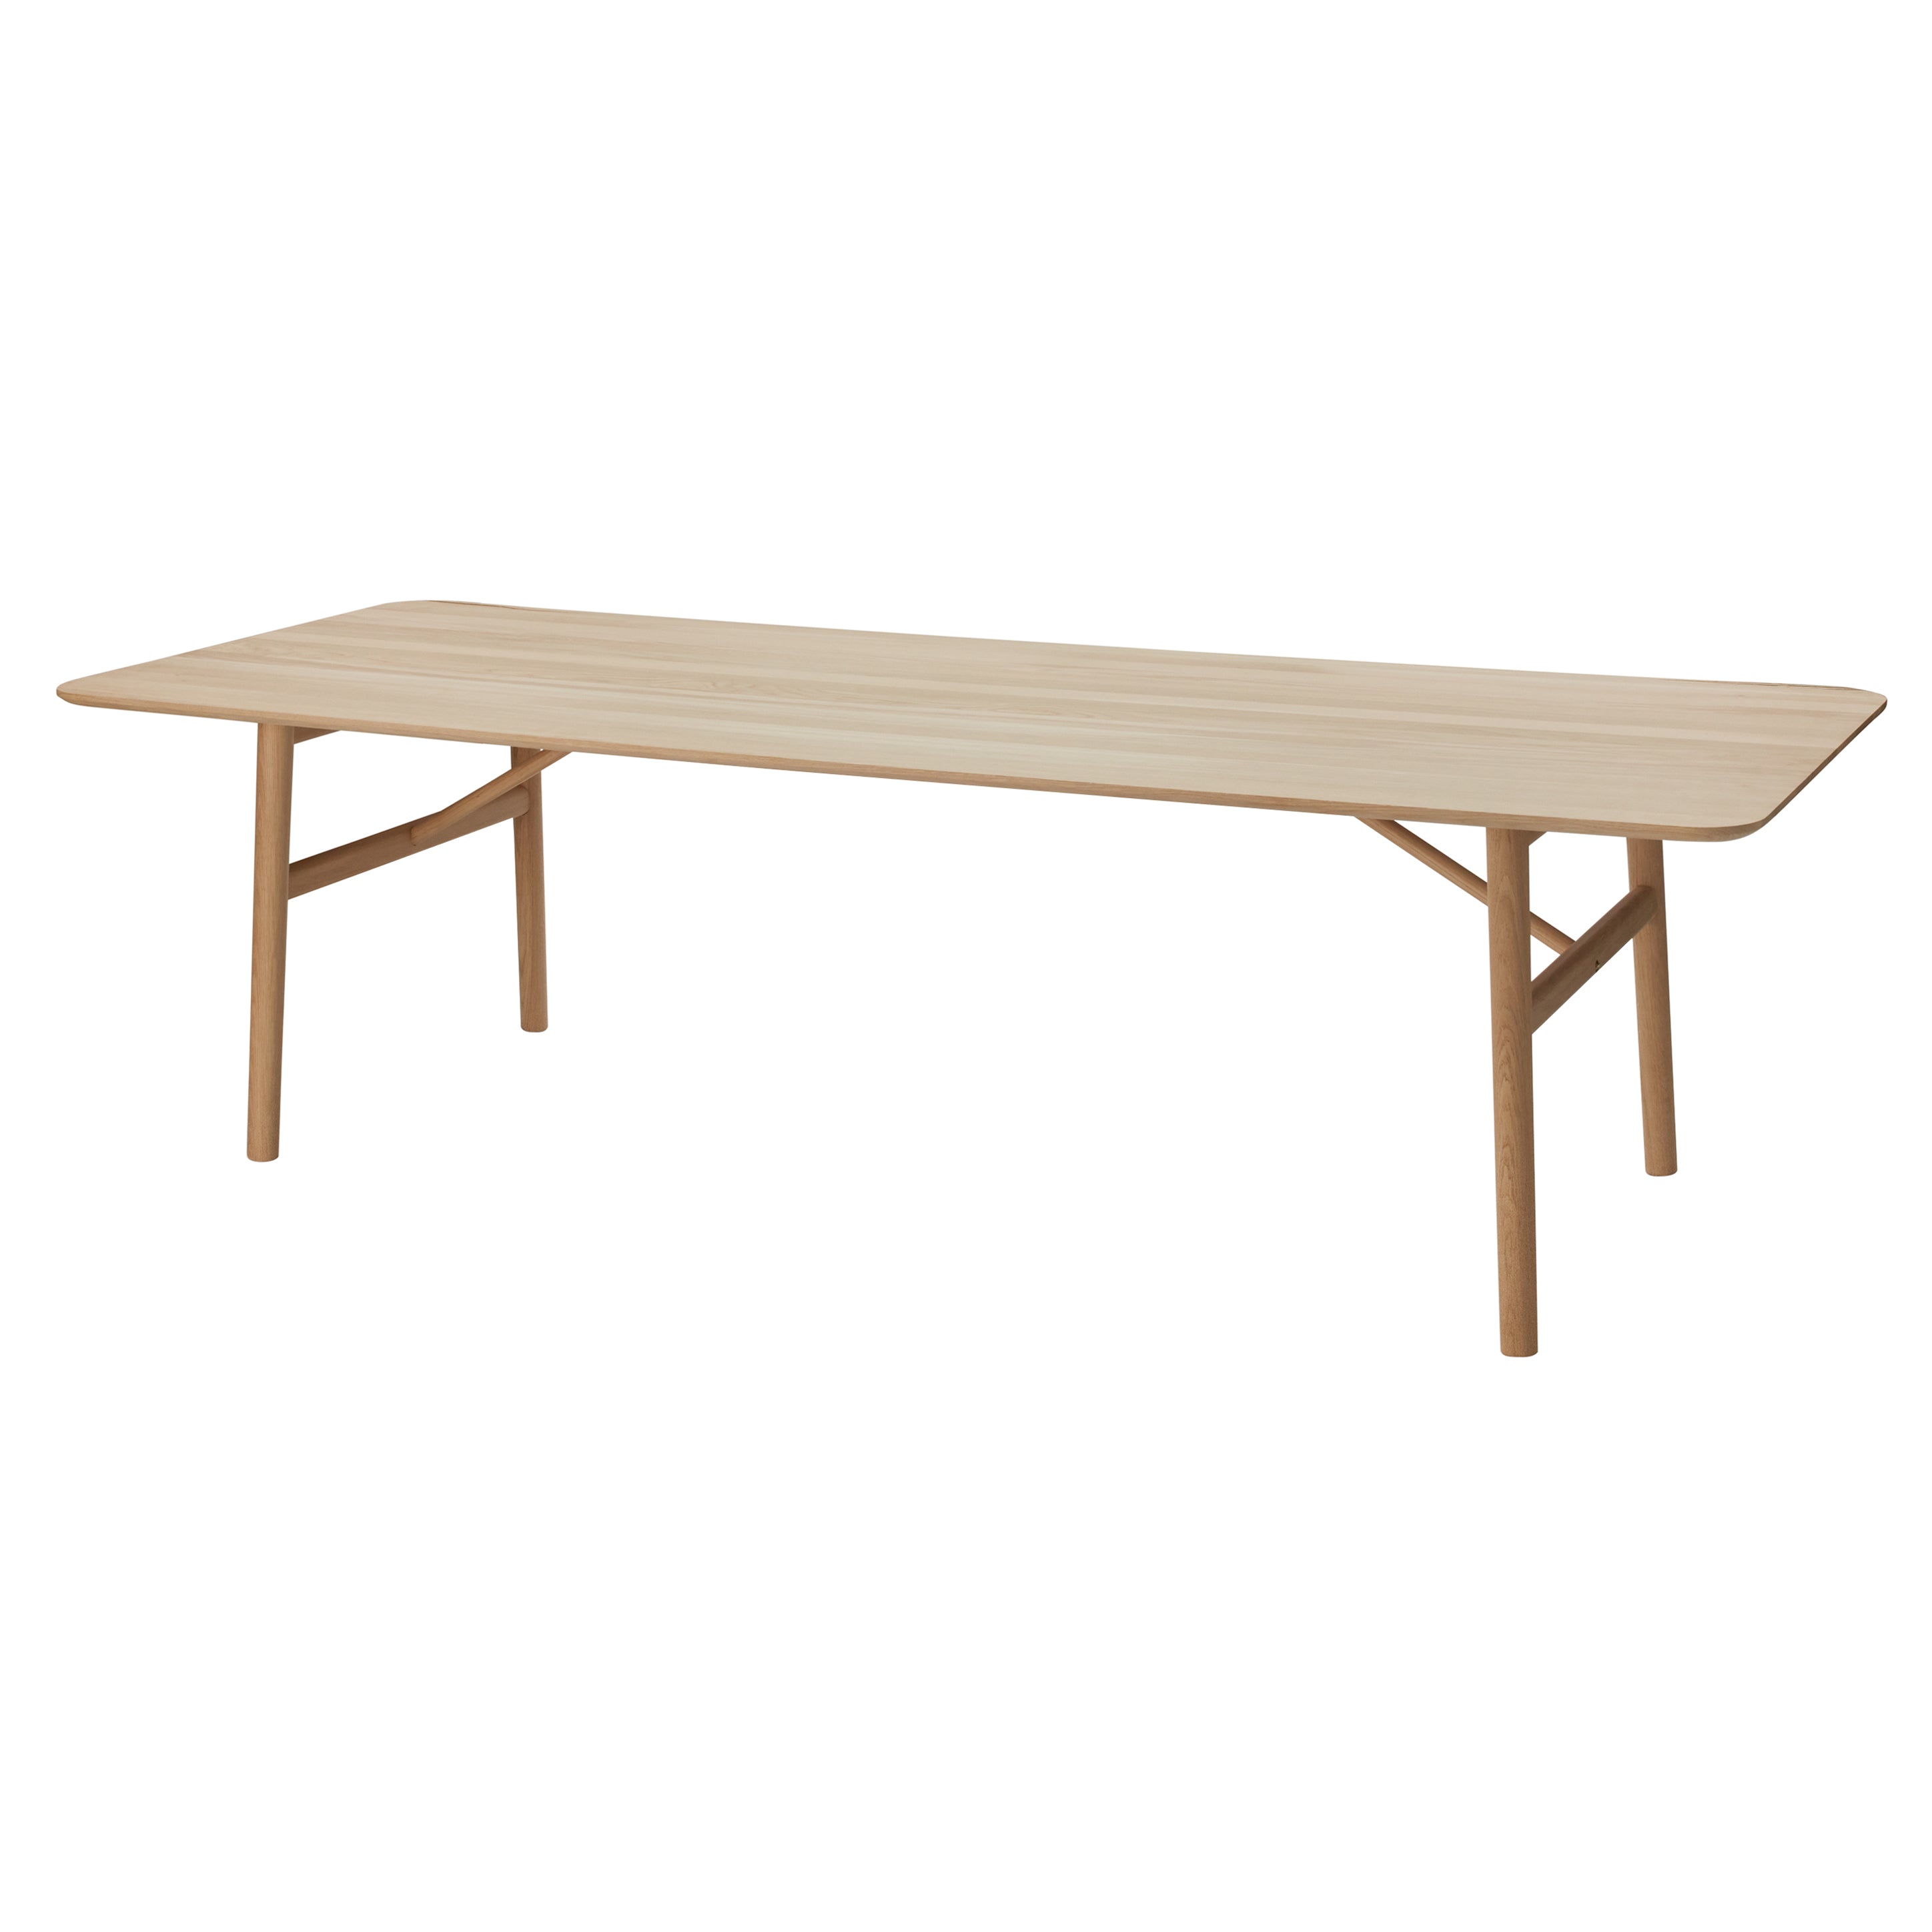 Hven Table: Large - 102.4